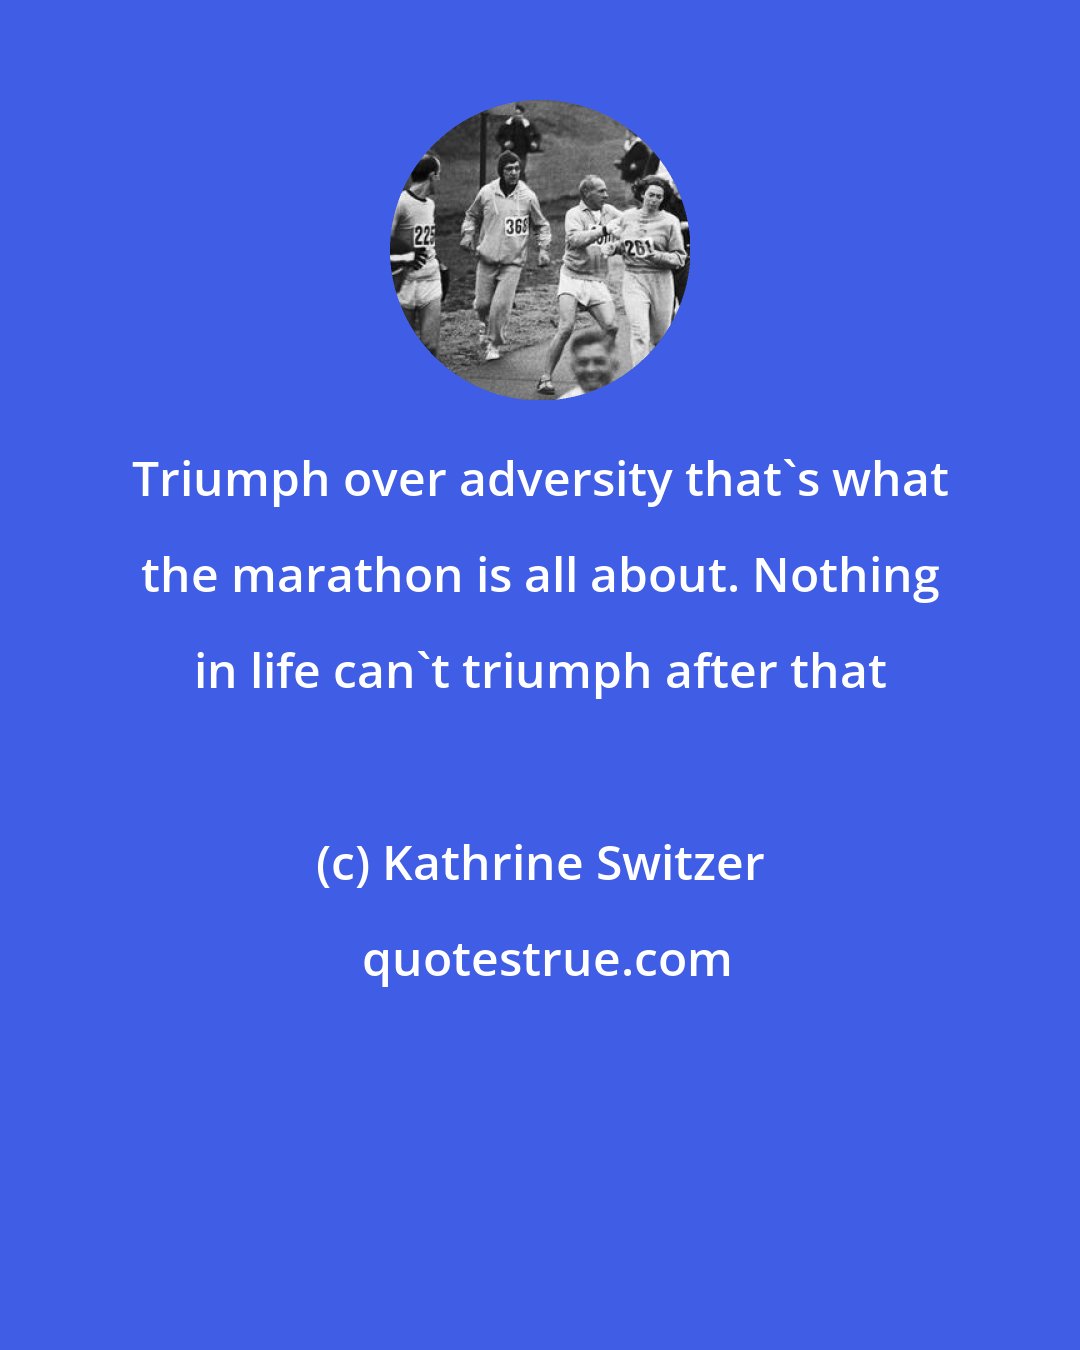 Kathrine Switzer: Triumph over adversity that's what the marathon is all about. Nothing in life can't triumph after that